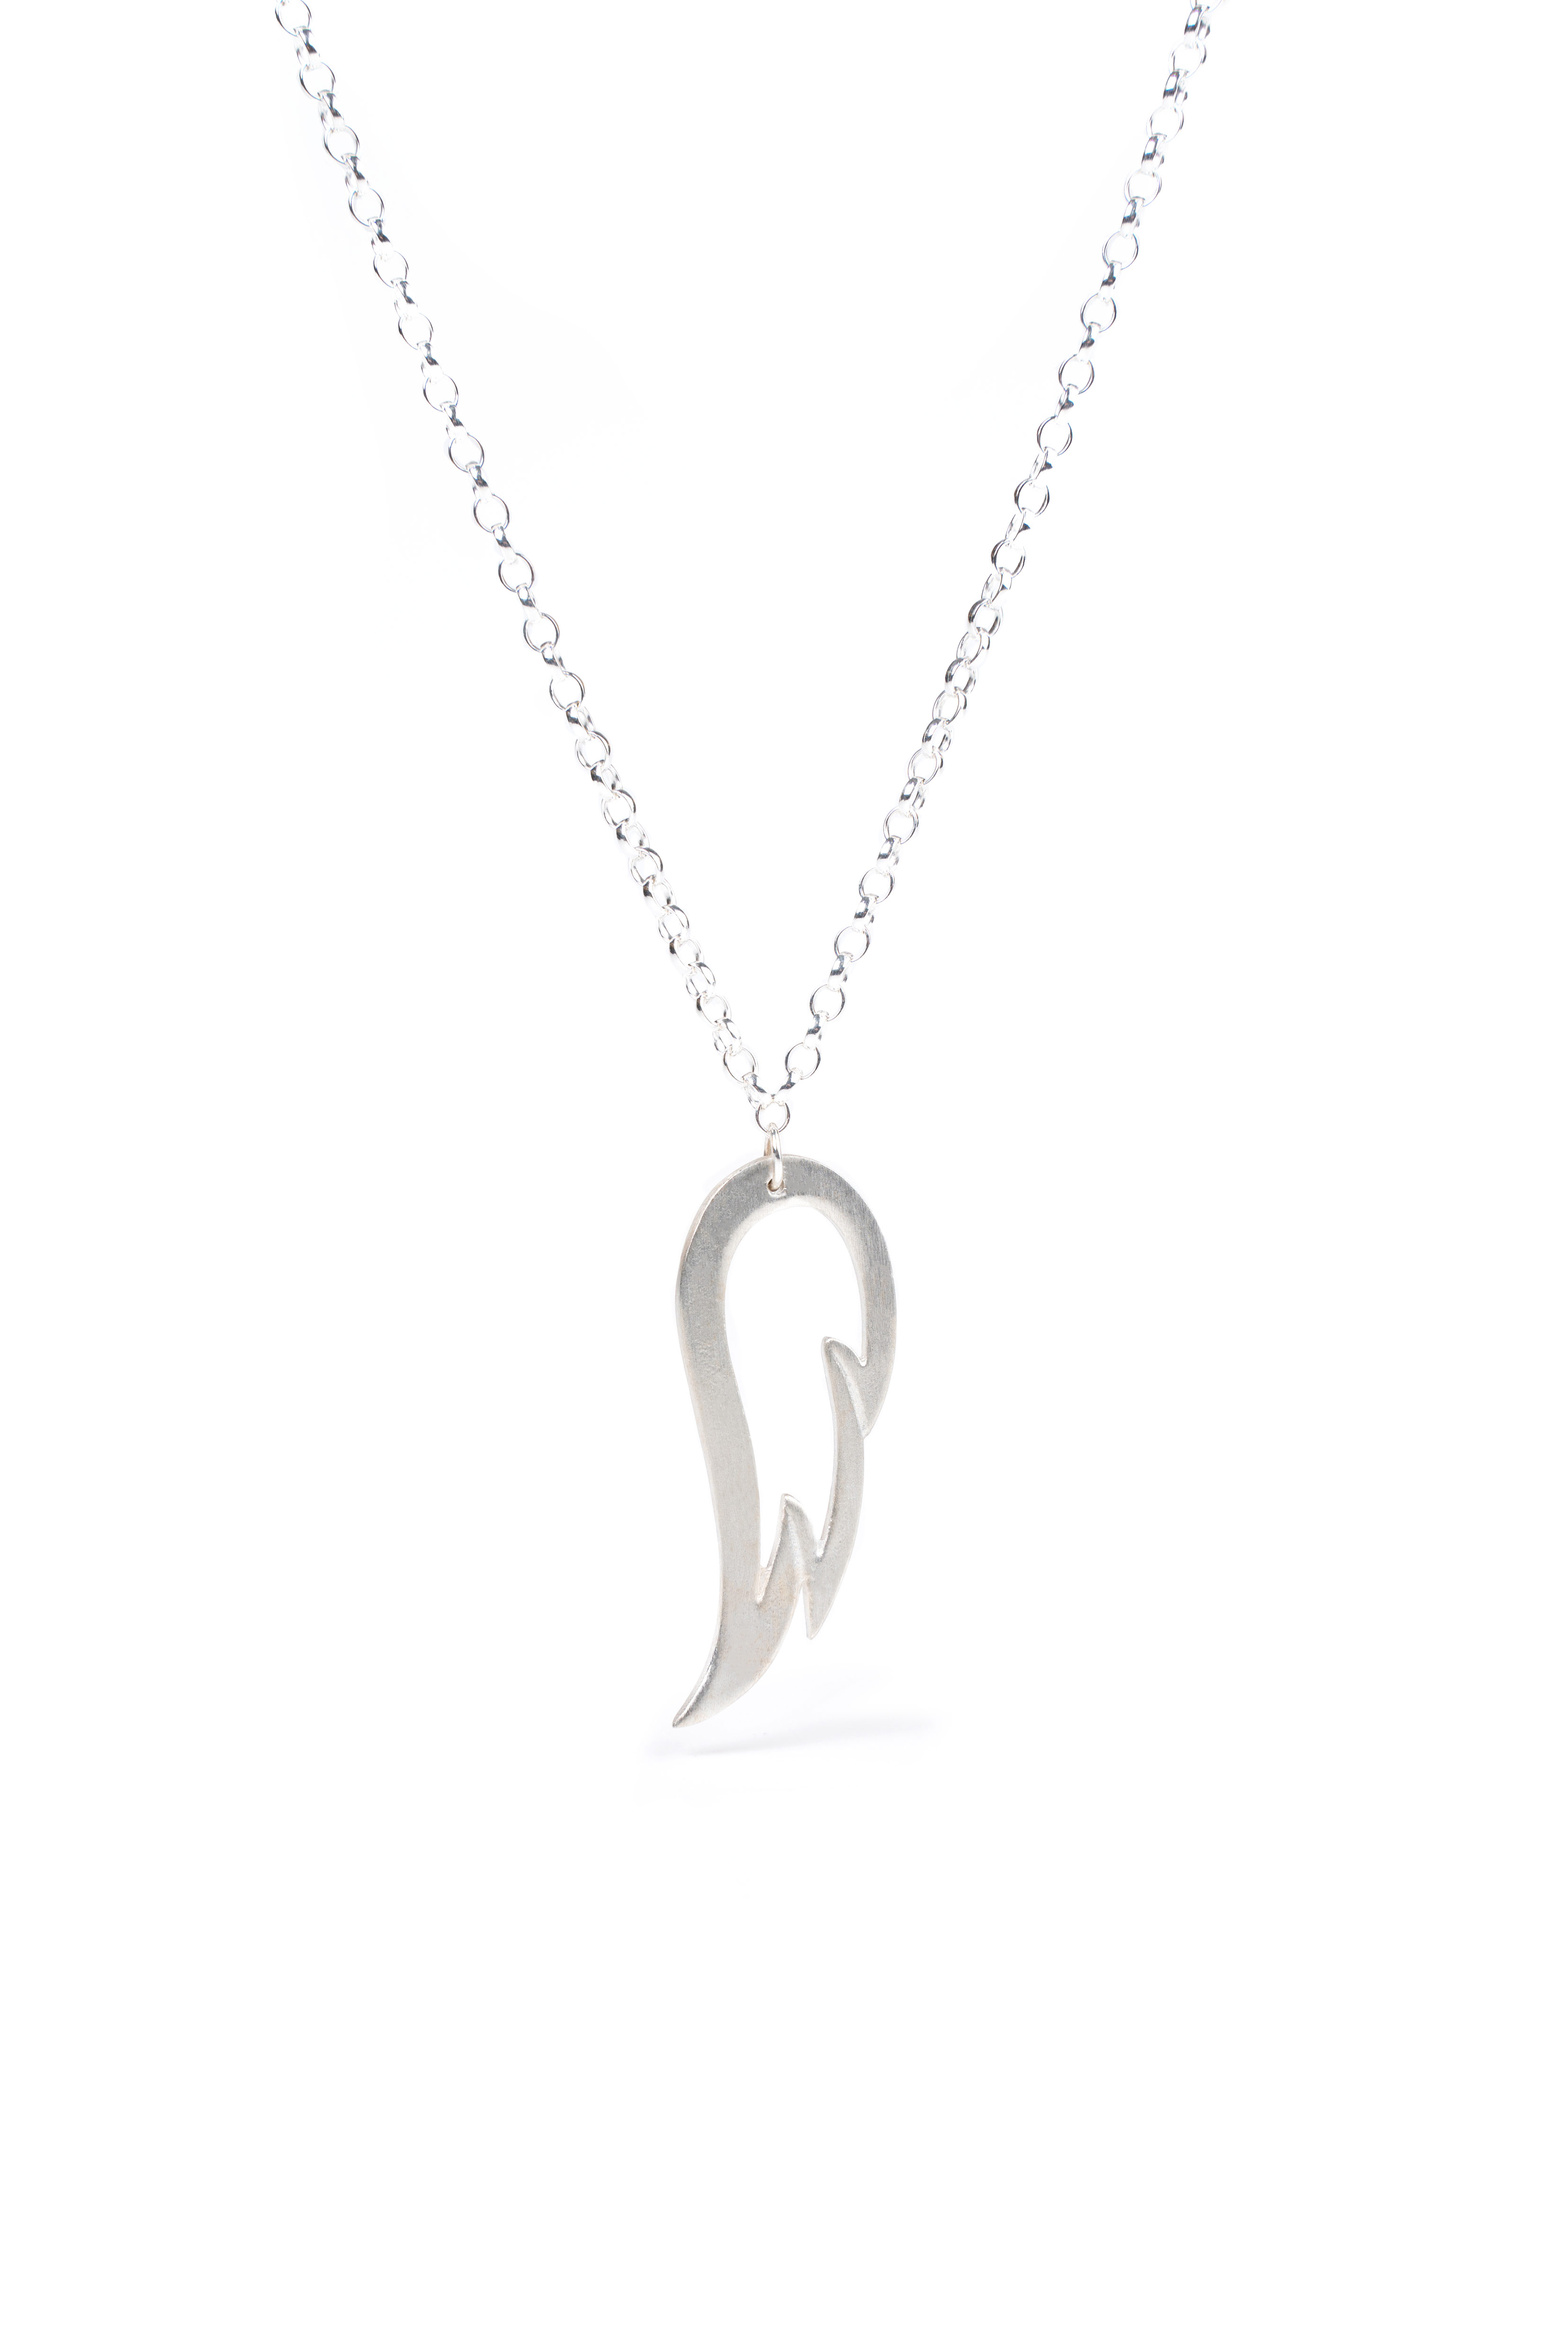 cb111_wingnecklace_silver_front.jpg